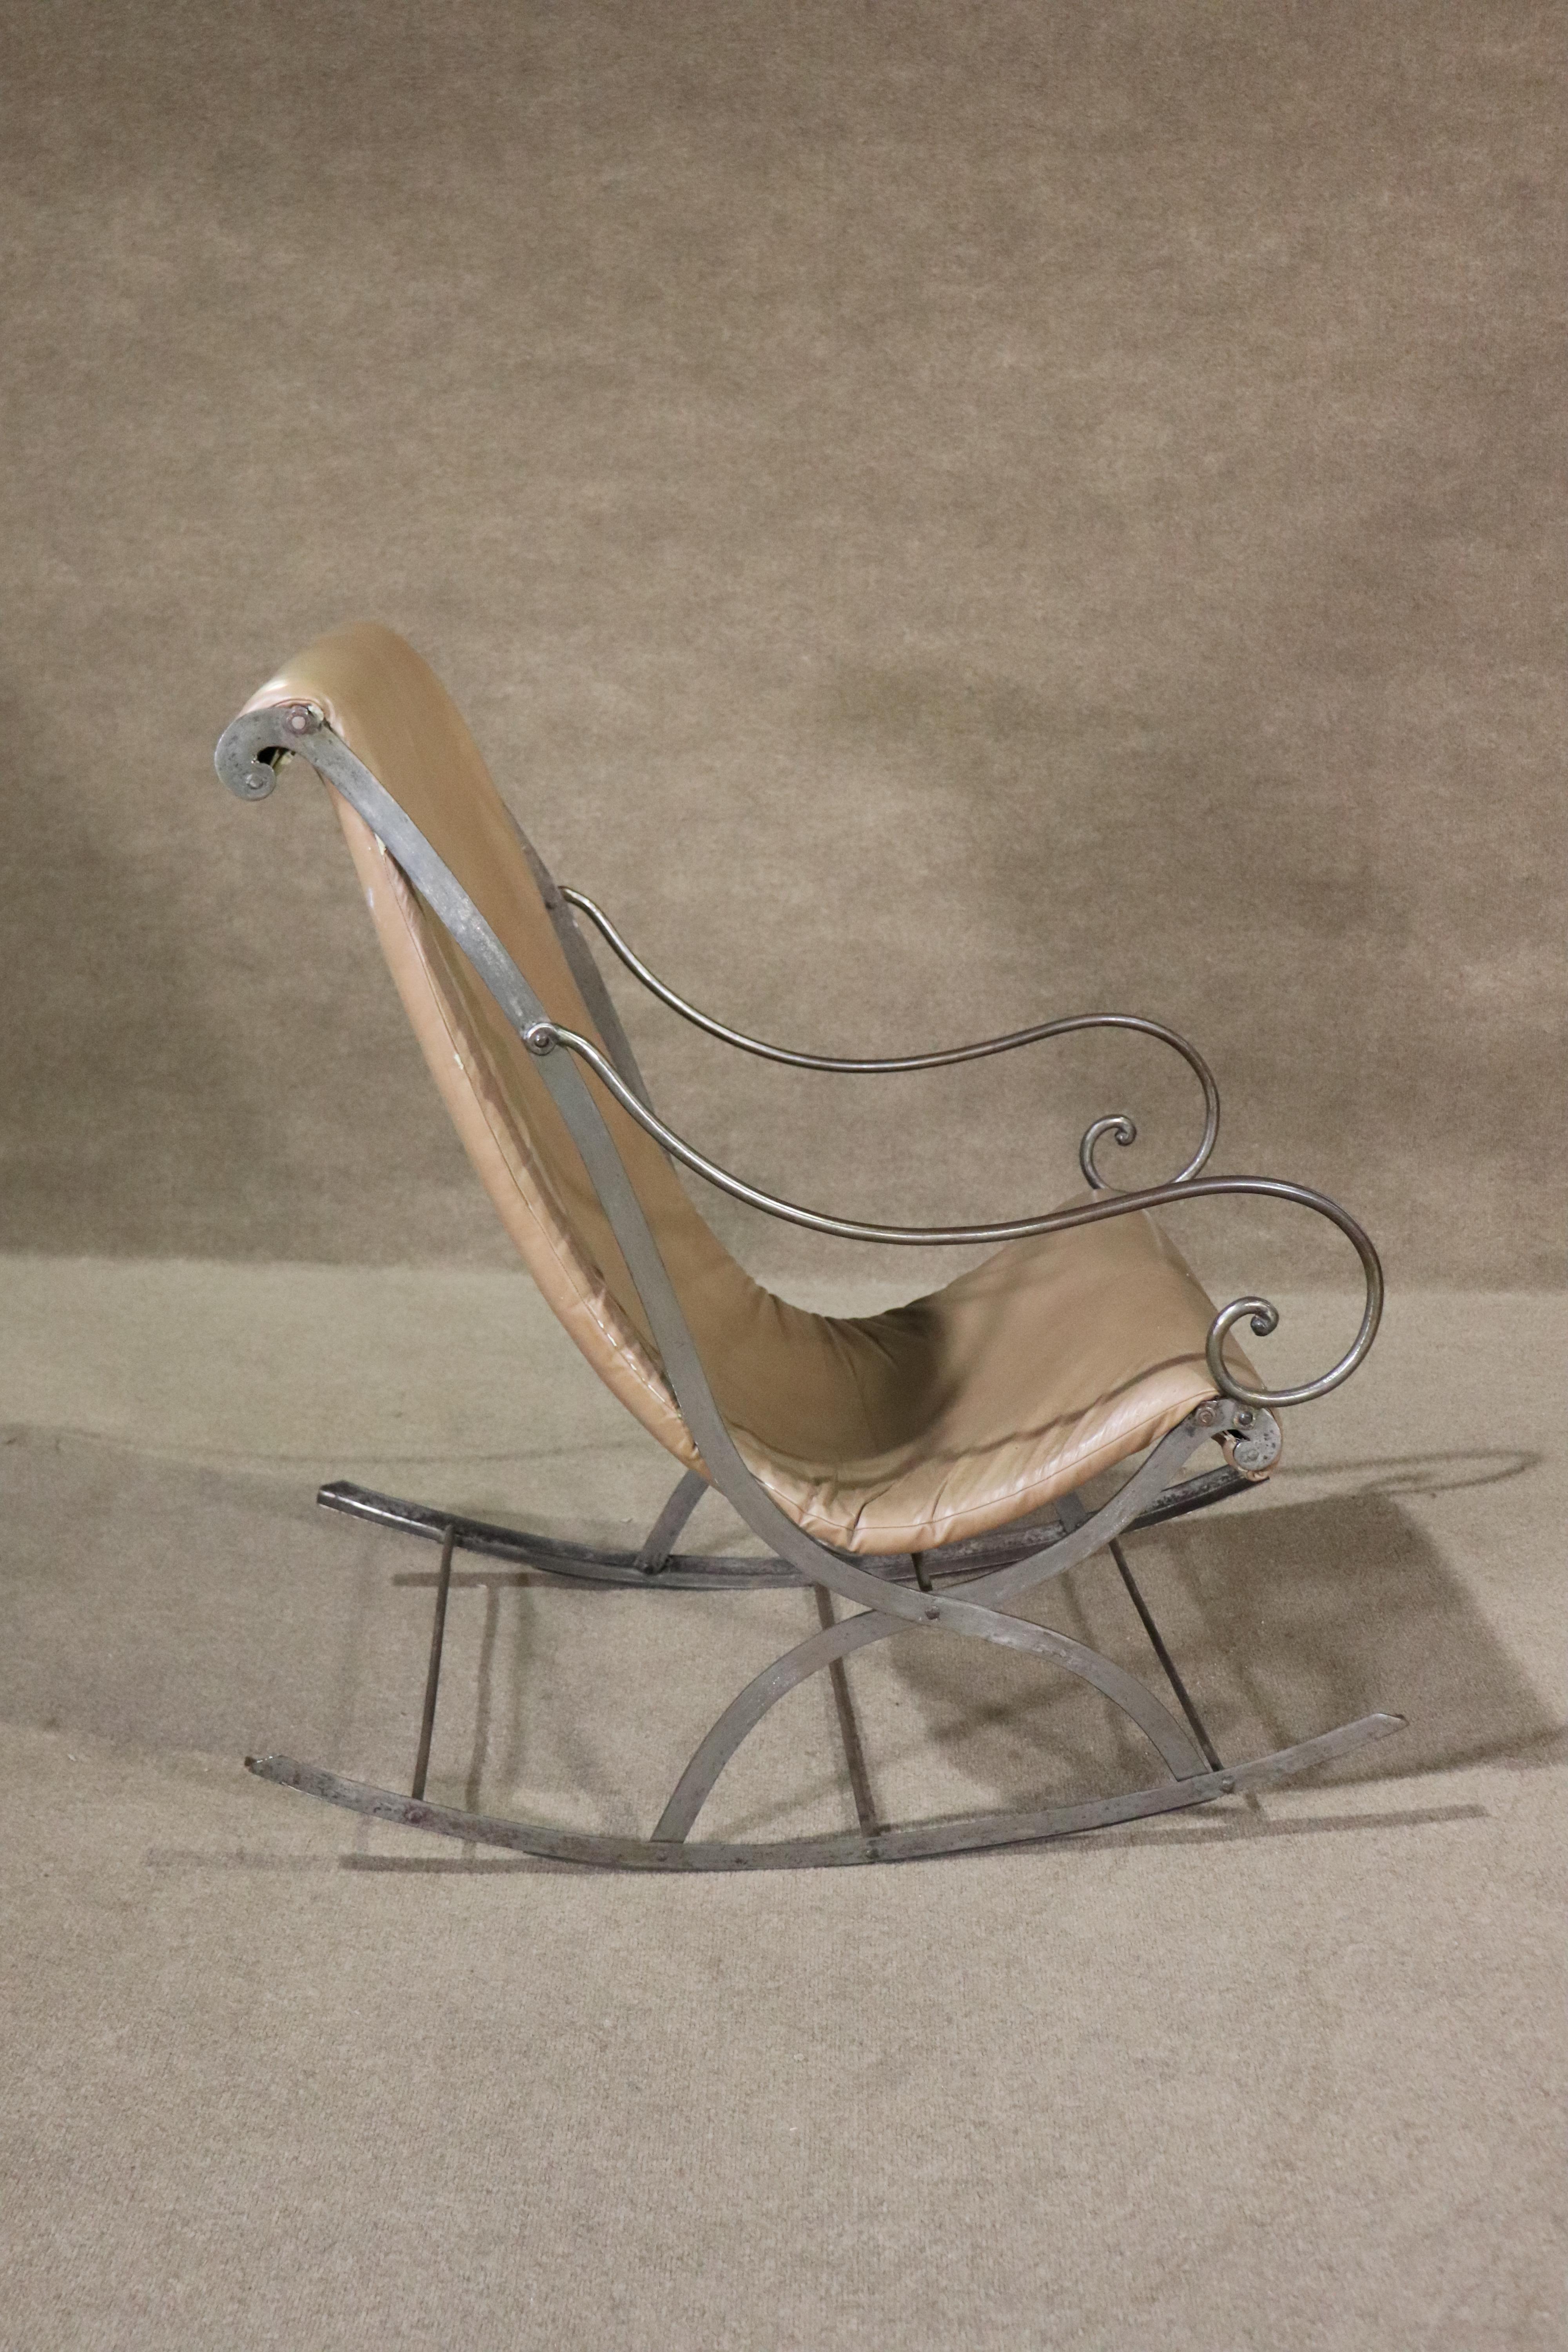 This mid-century rocking chair is built with a strong metal frame with a curving vinyl seat. 
Please confirm location NY or NJ